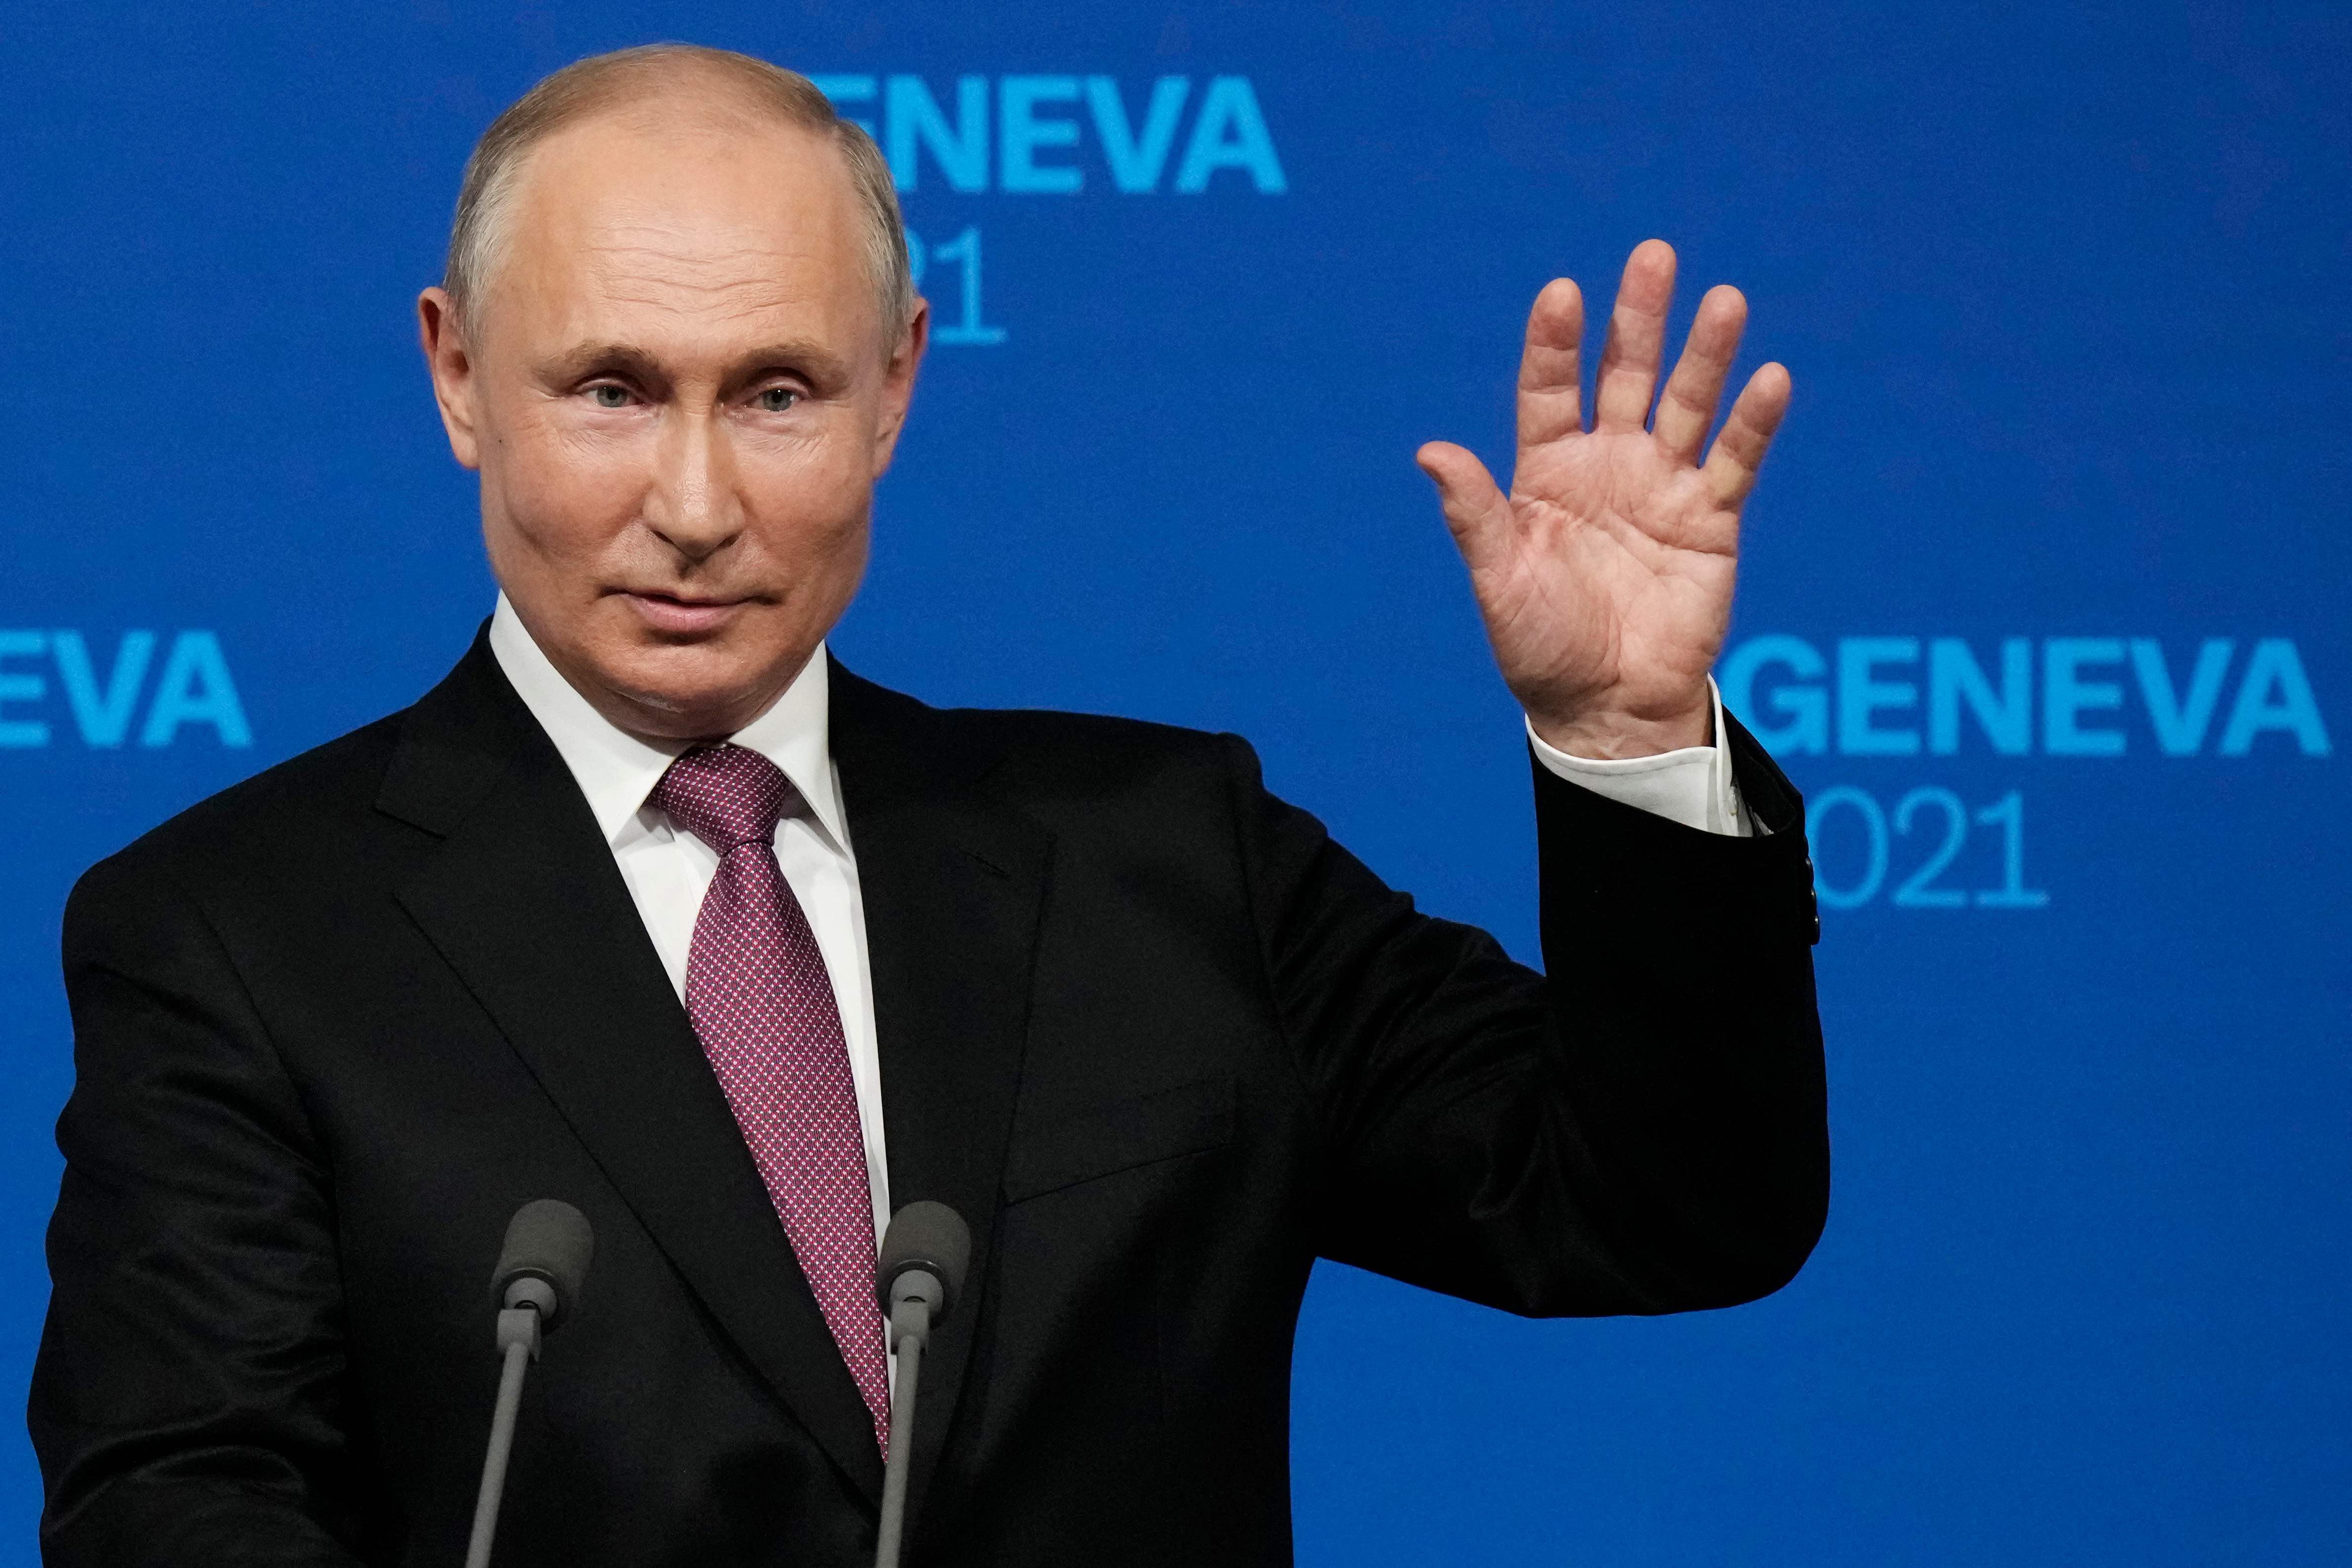 Russia's President Vladimir Putin holds a press conference after meeting with US President in Geneva